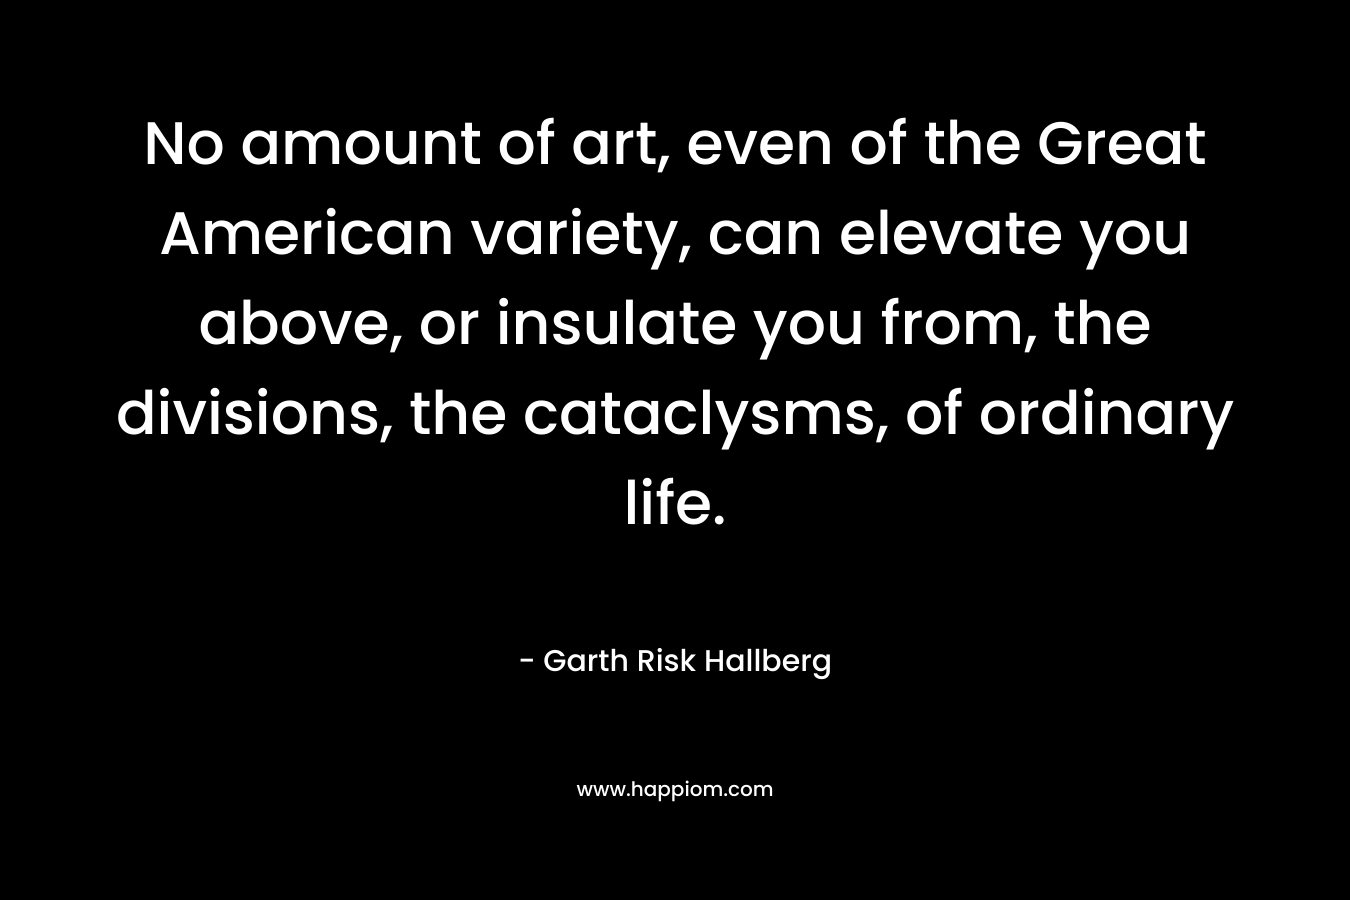 No amount of art, even of the Great American variety, can elevate you above, or insulate you from, the divisions, the cataclysms, of ordinary life. – Garth Risk Hallberg